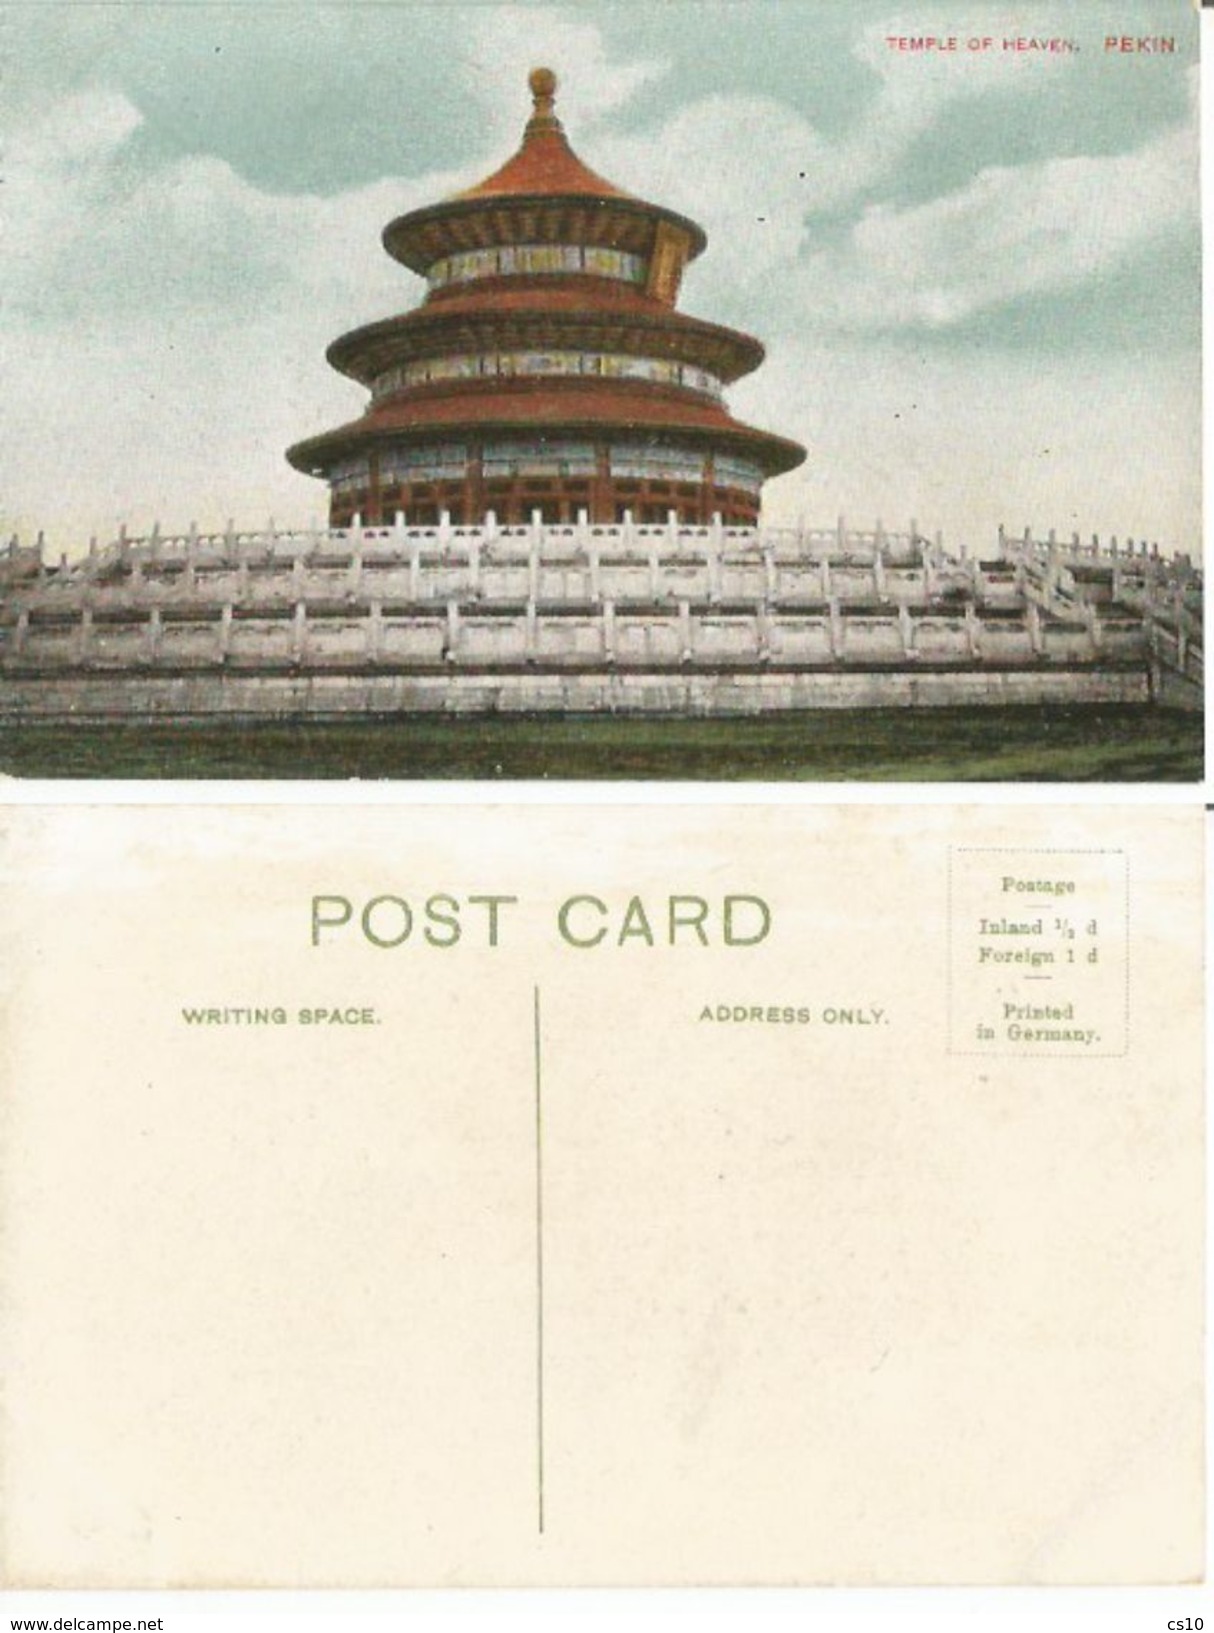 China Empire Temple Of Heaven In Pekin Unused PPC From The 30's - Cina